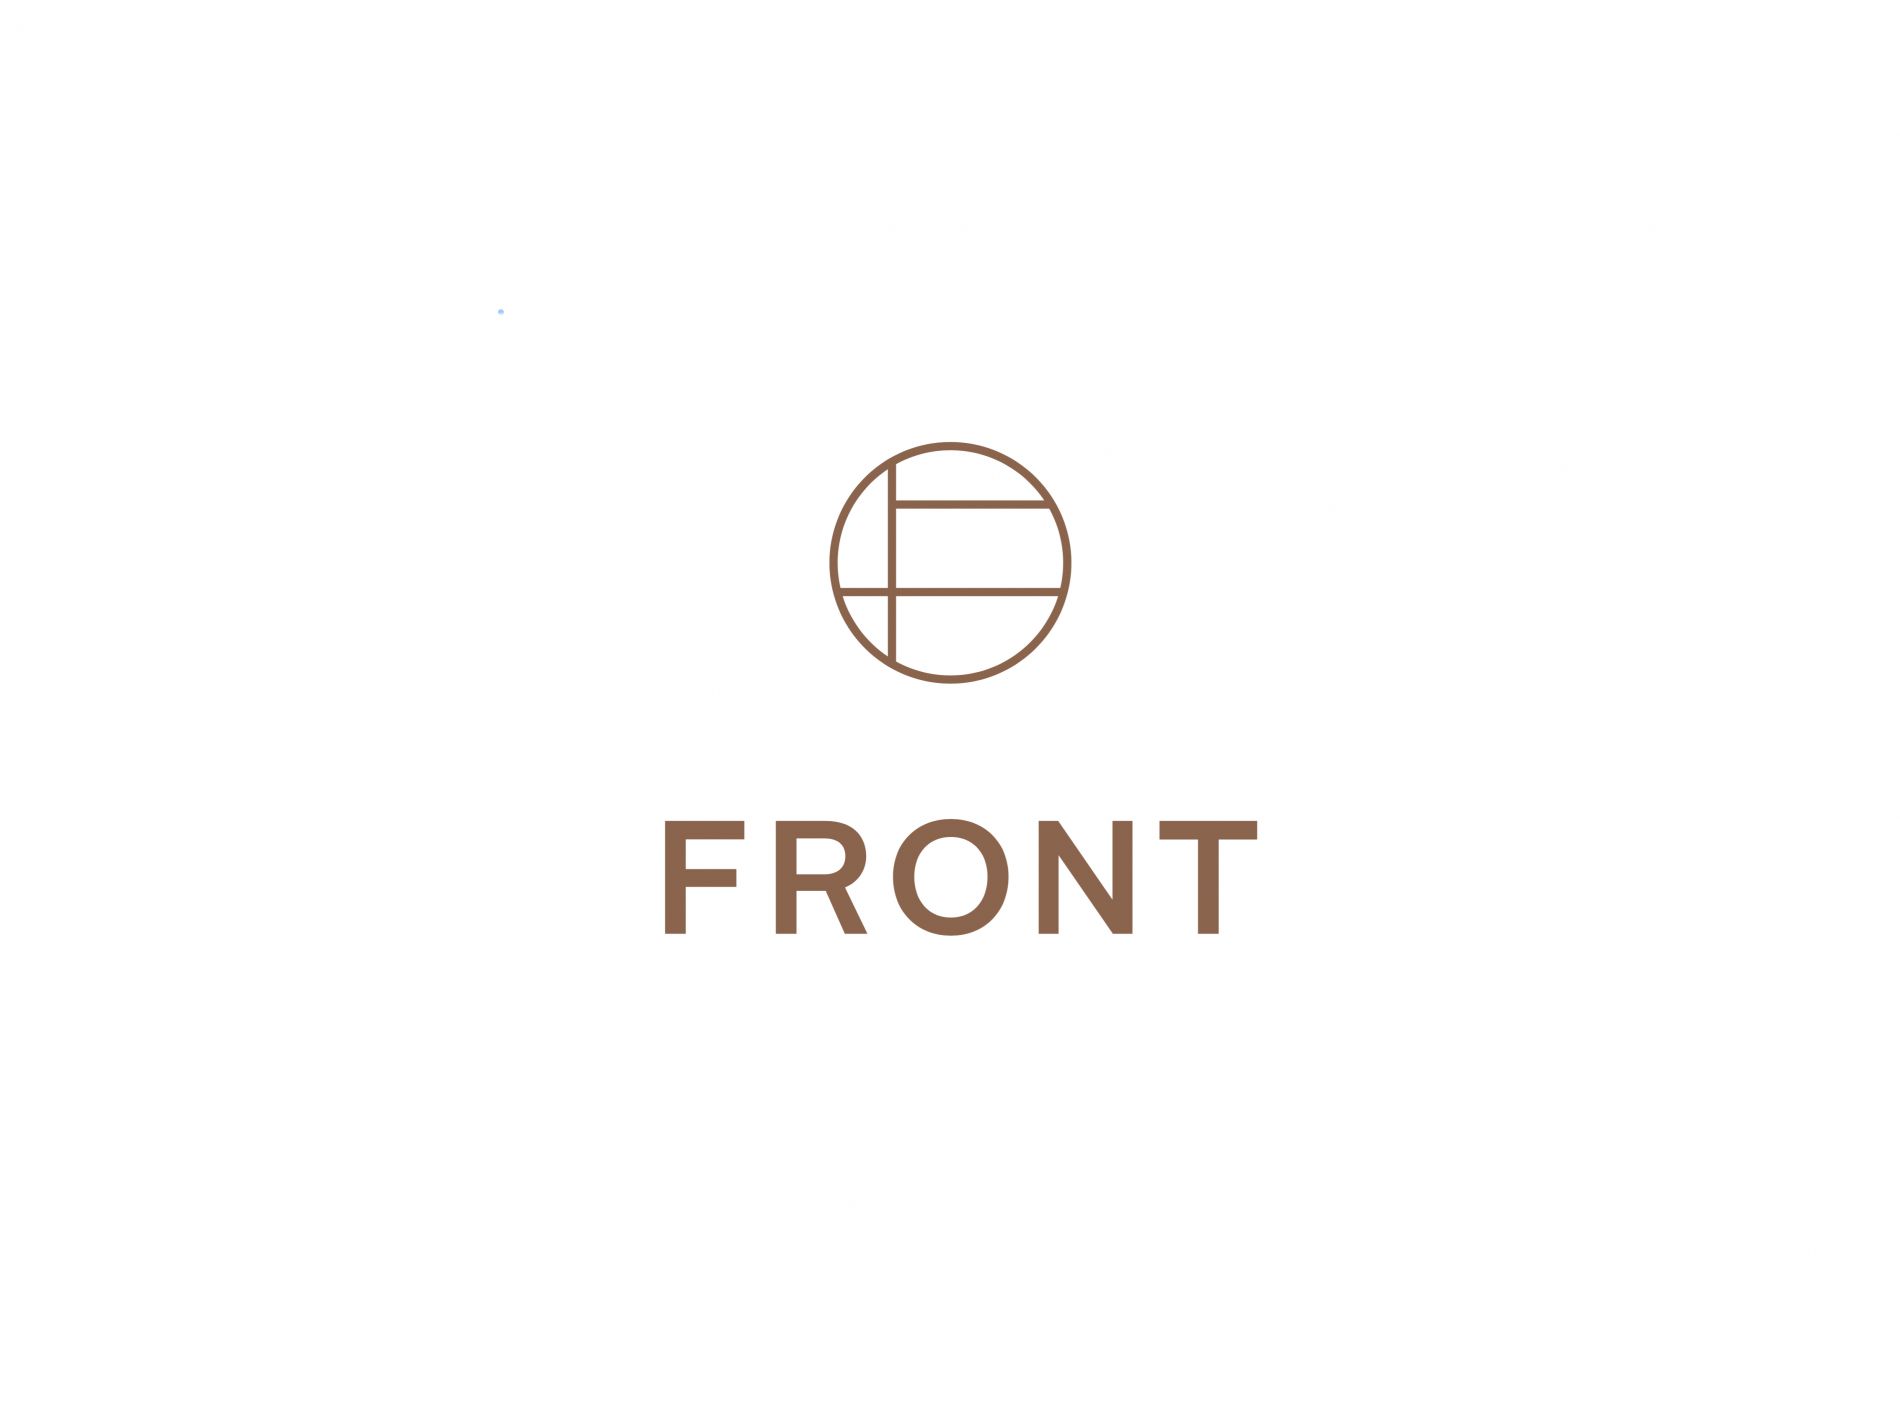 Brand news for FRONT